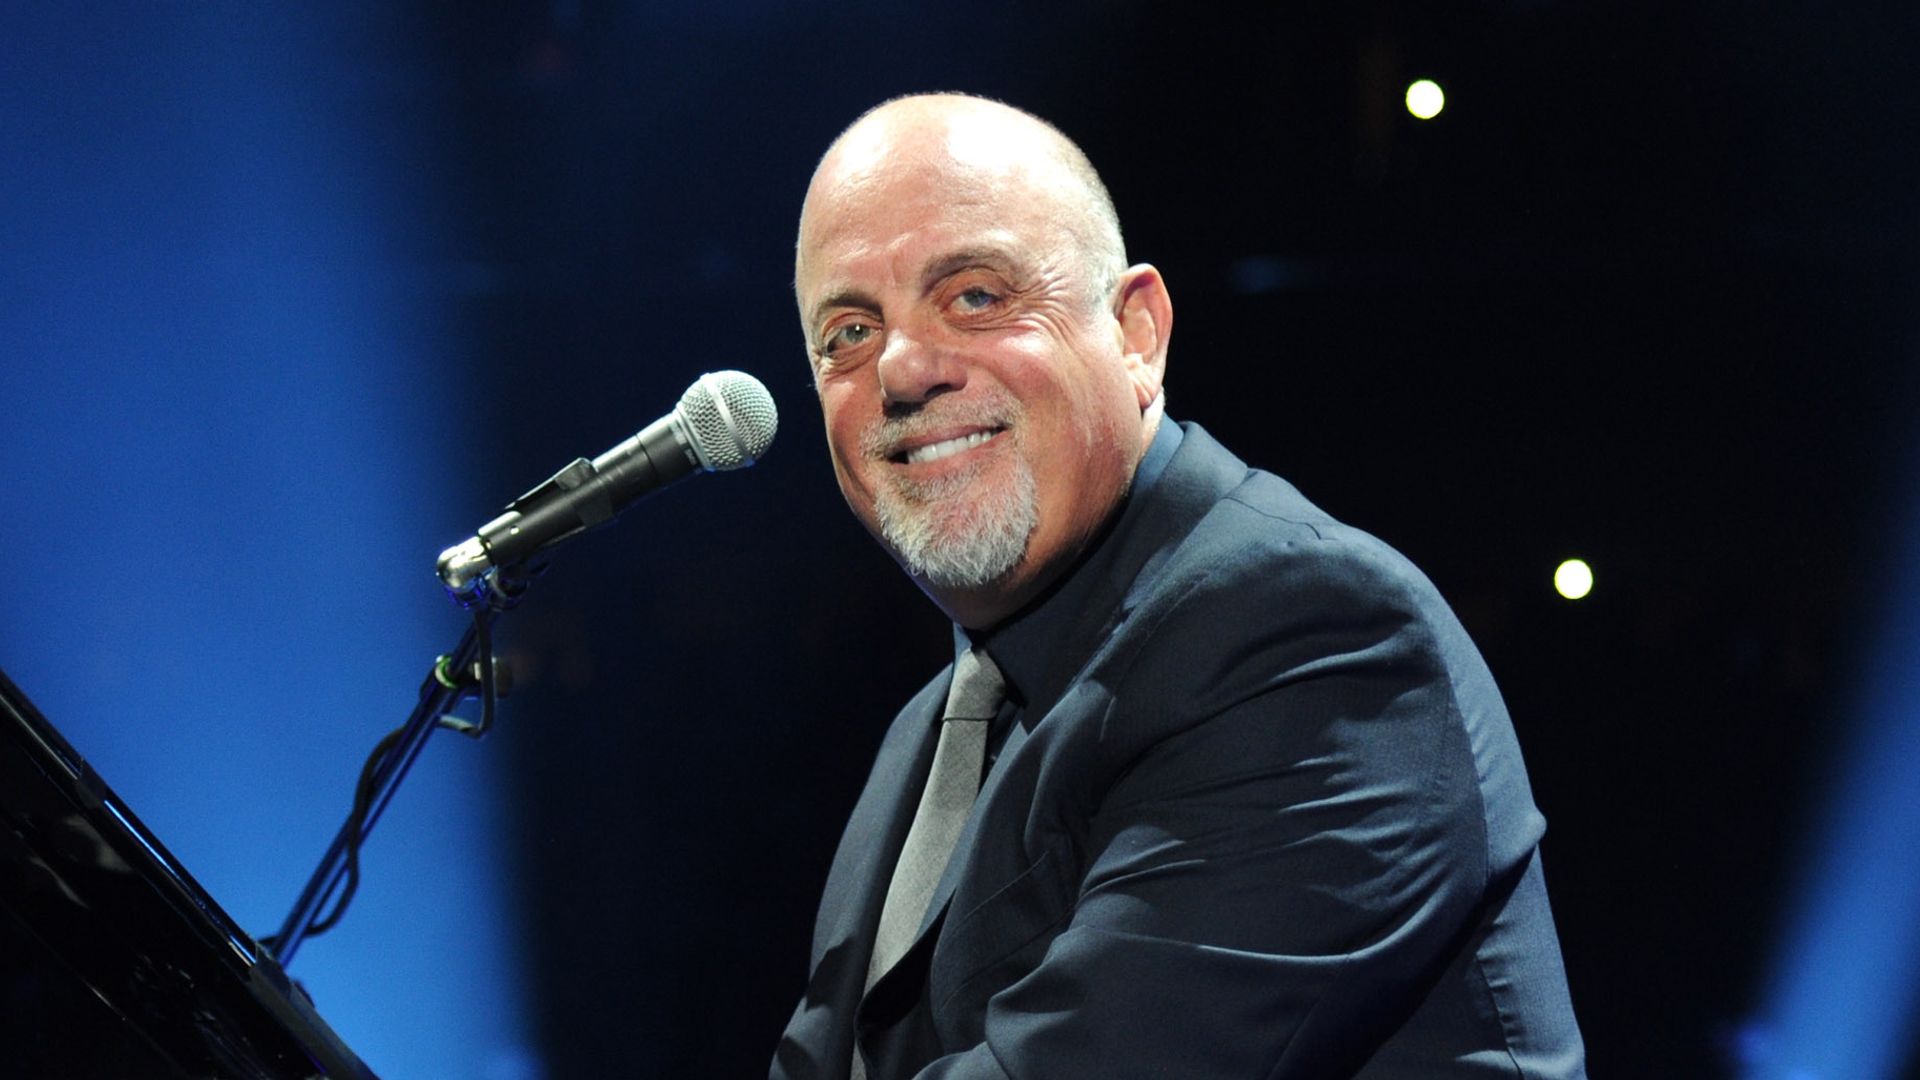 Billy Joel's four marriages and blended family at 74, including exes Christie Brinkley and more